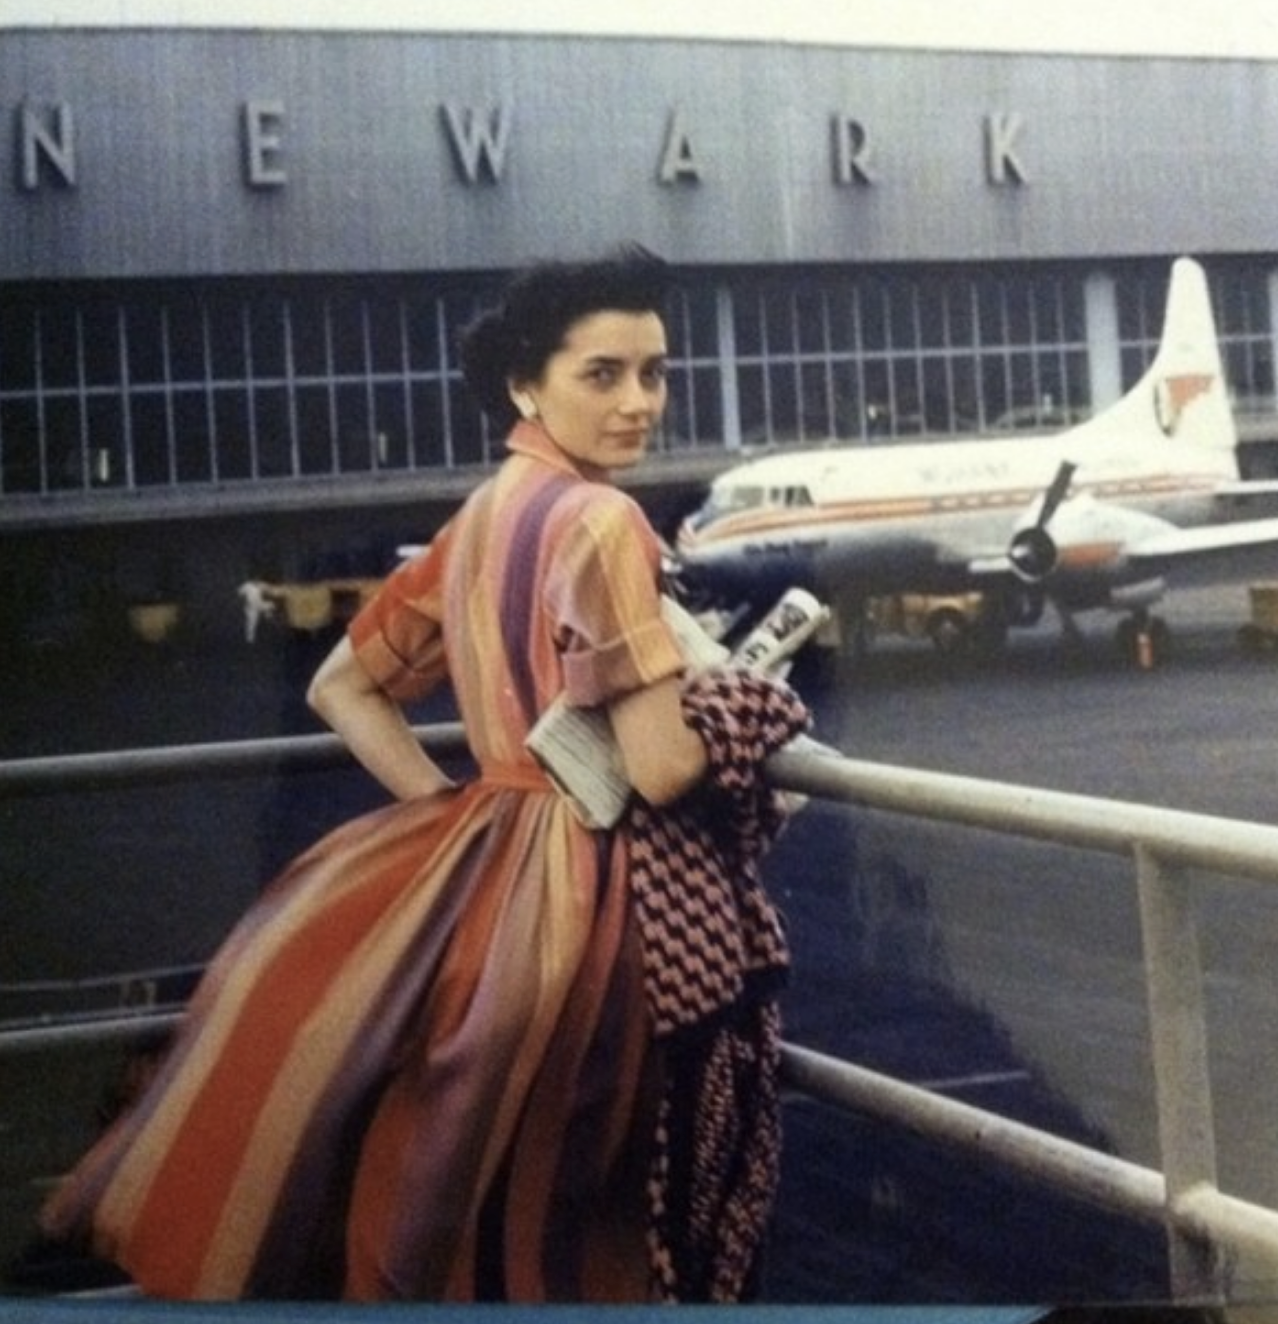 A woman at Newark airport in 1958